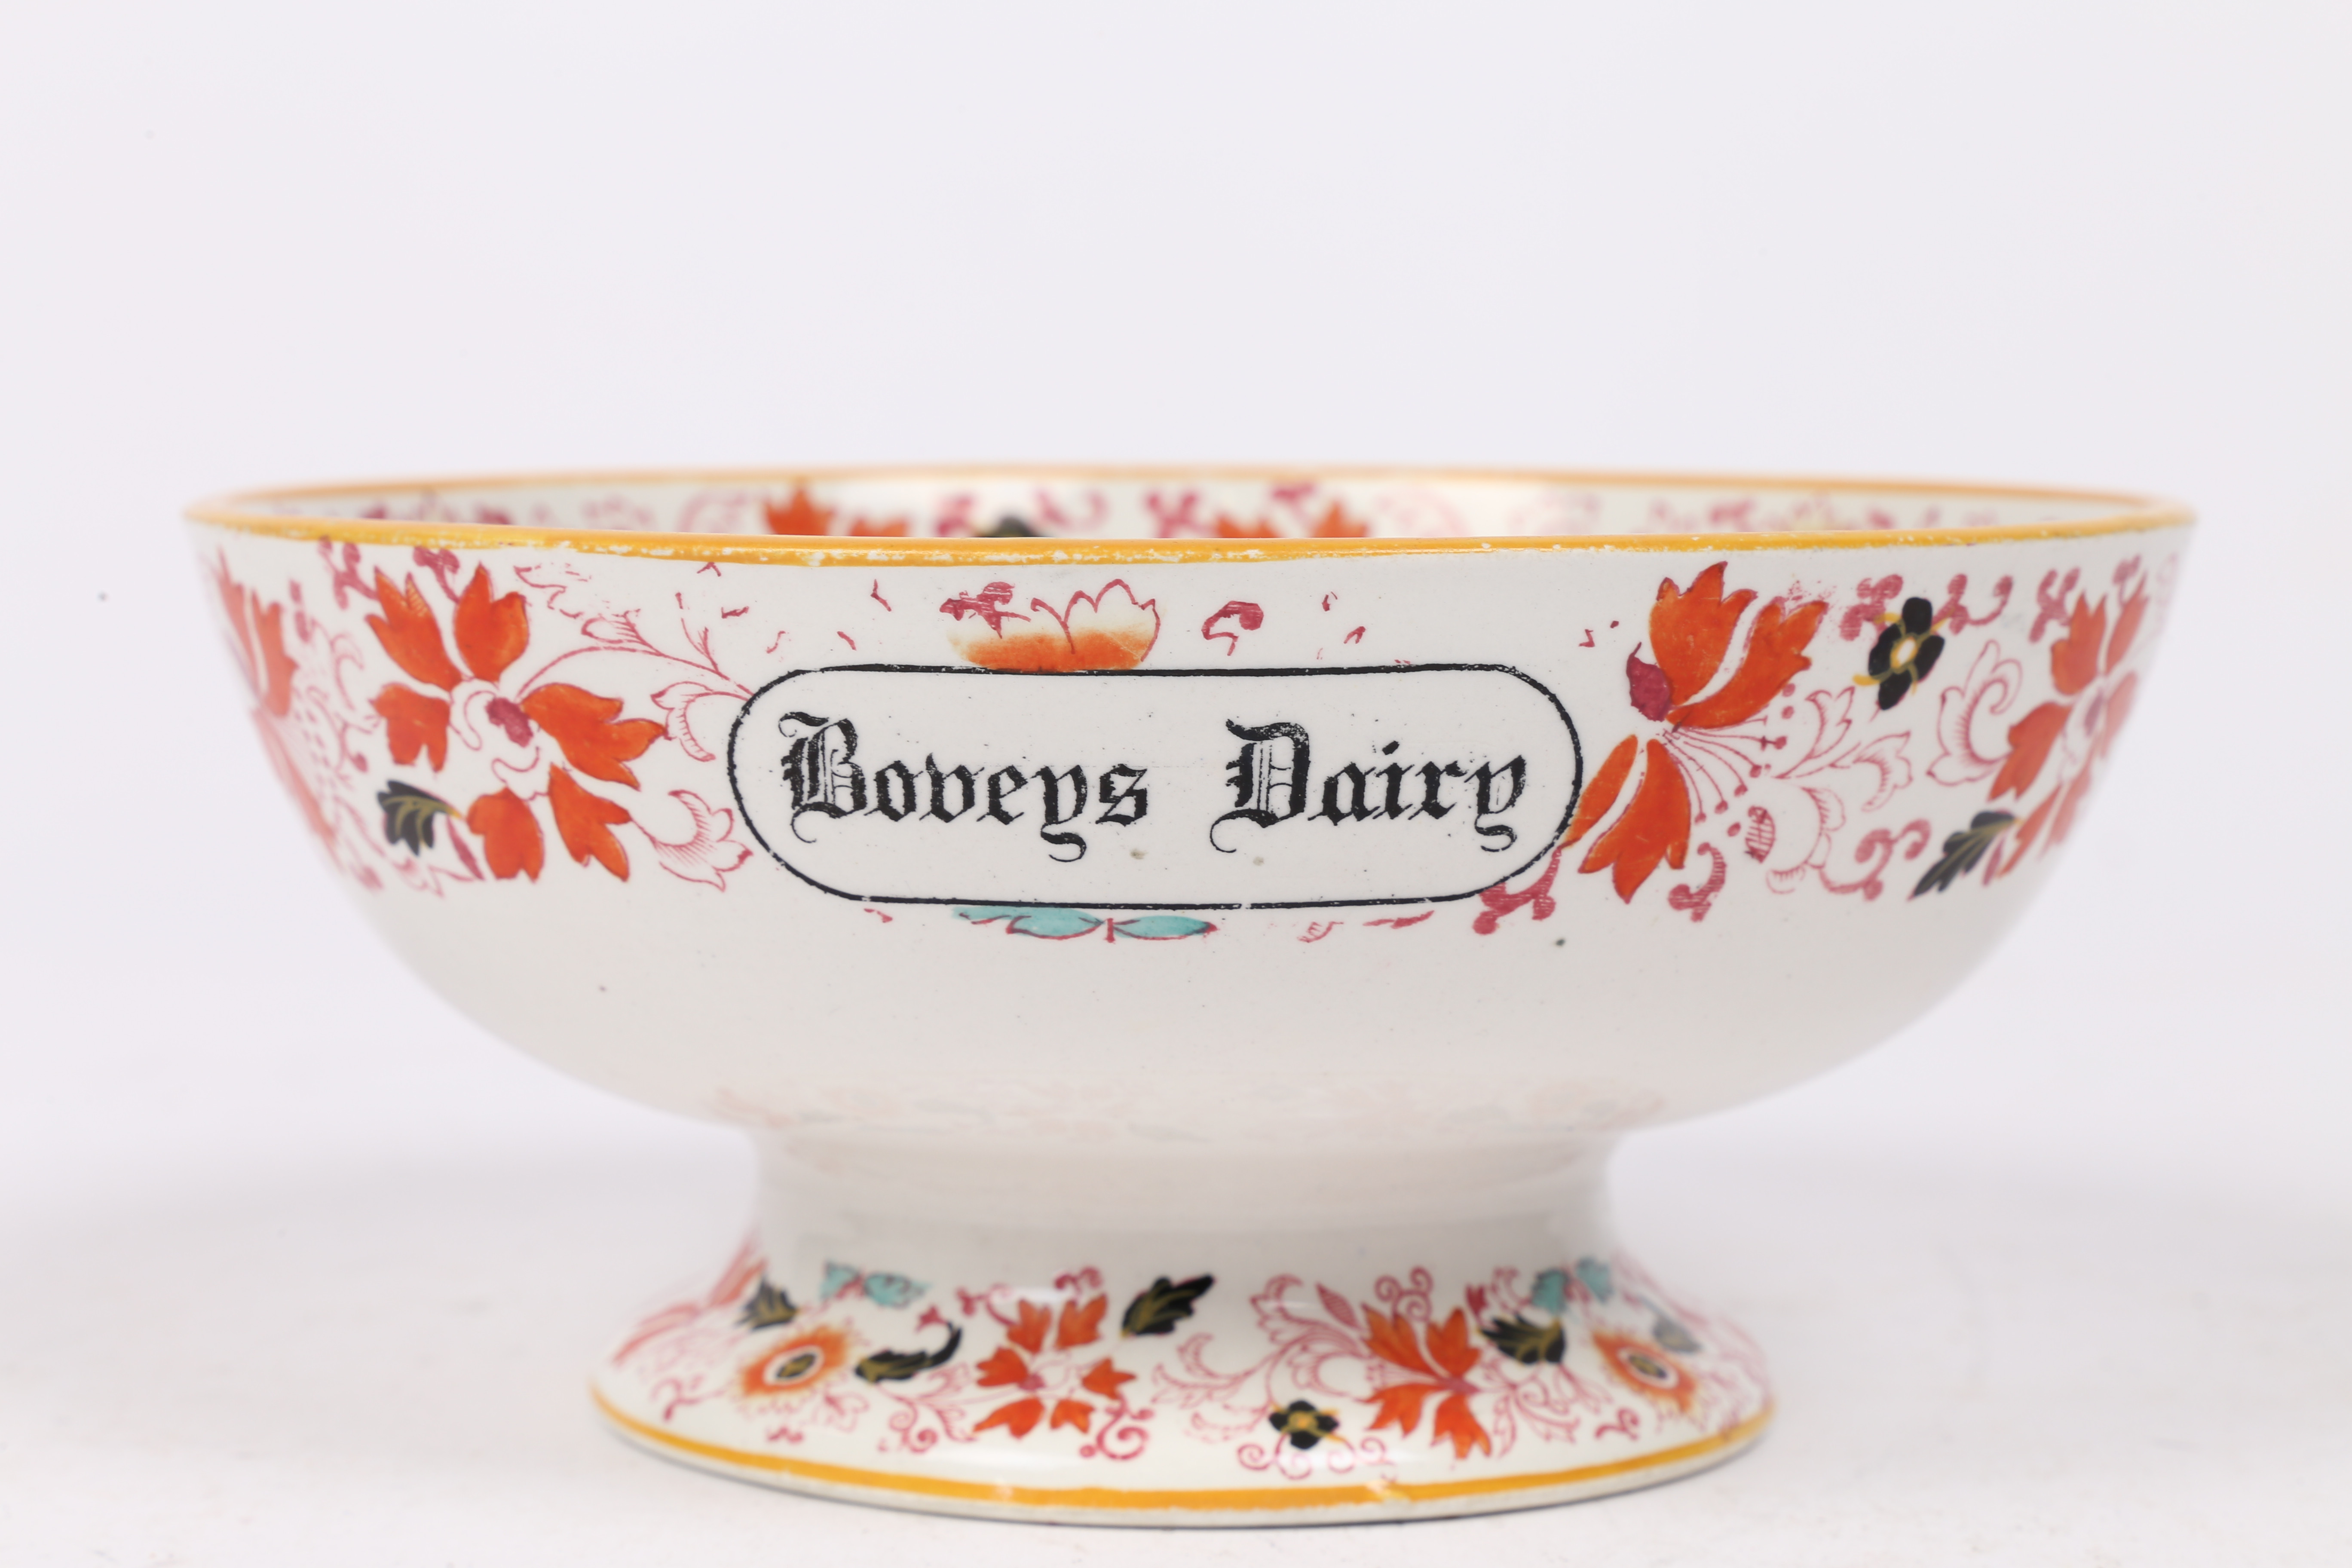 'BOVEYS DAIRY'. AN UNUSUAL LATE 19TH CENTURY PATTERNED DAIRY BOWL. - Image 2 of 7